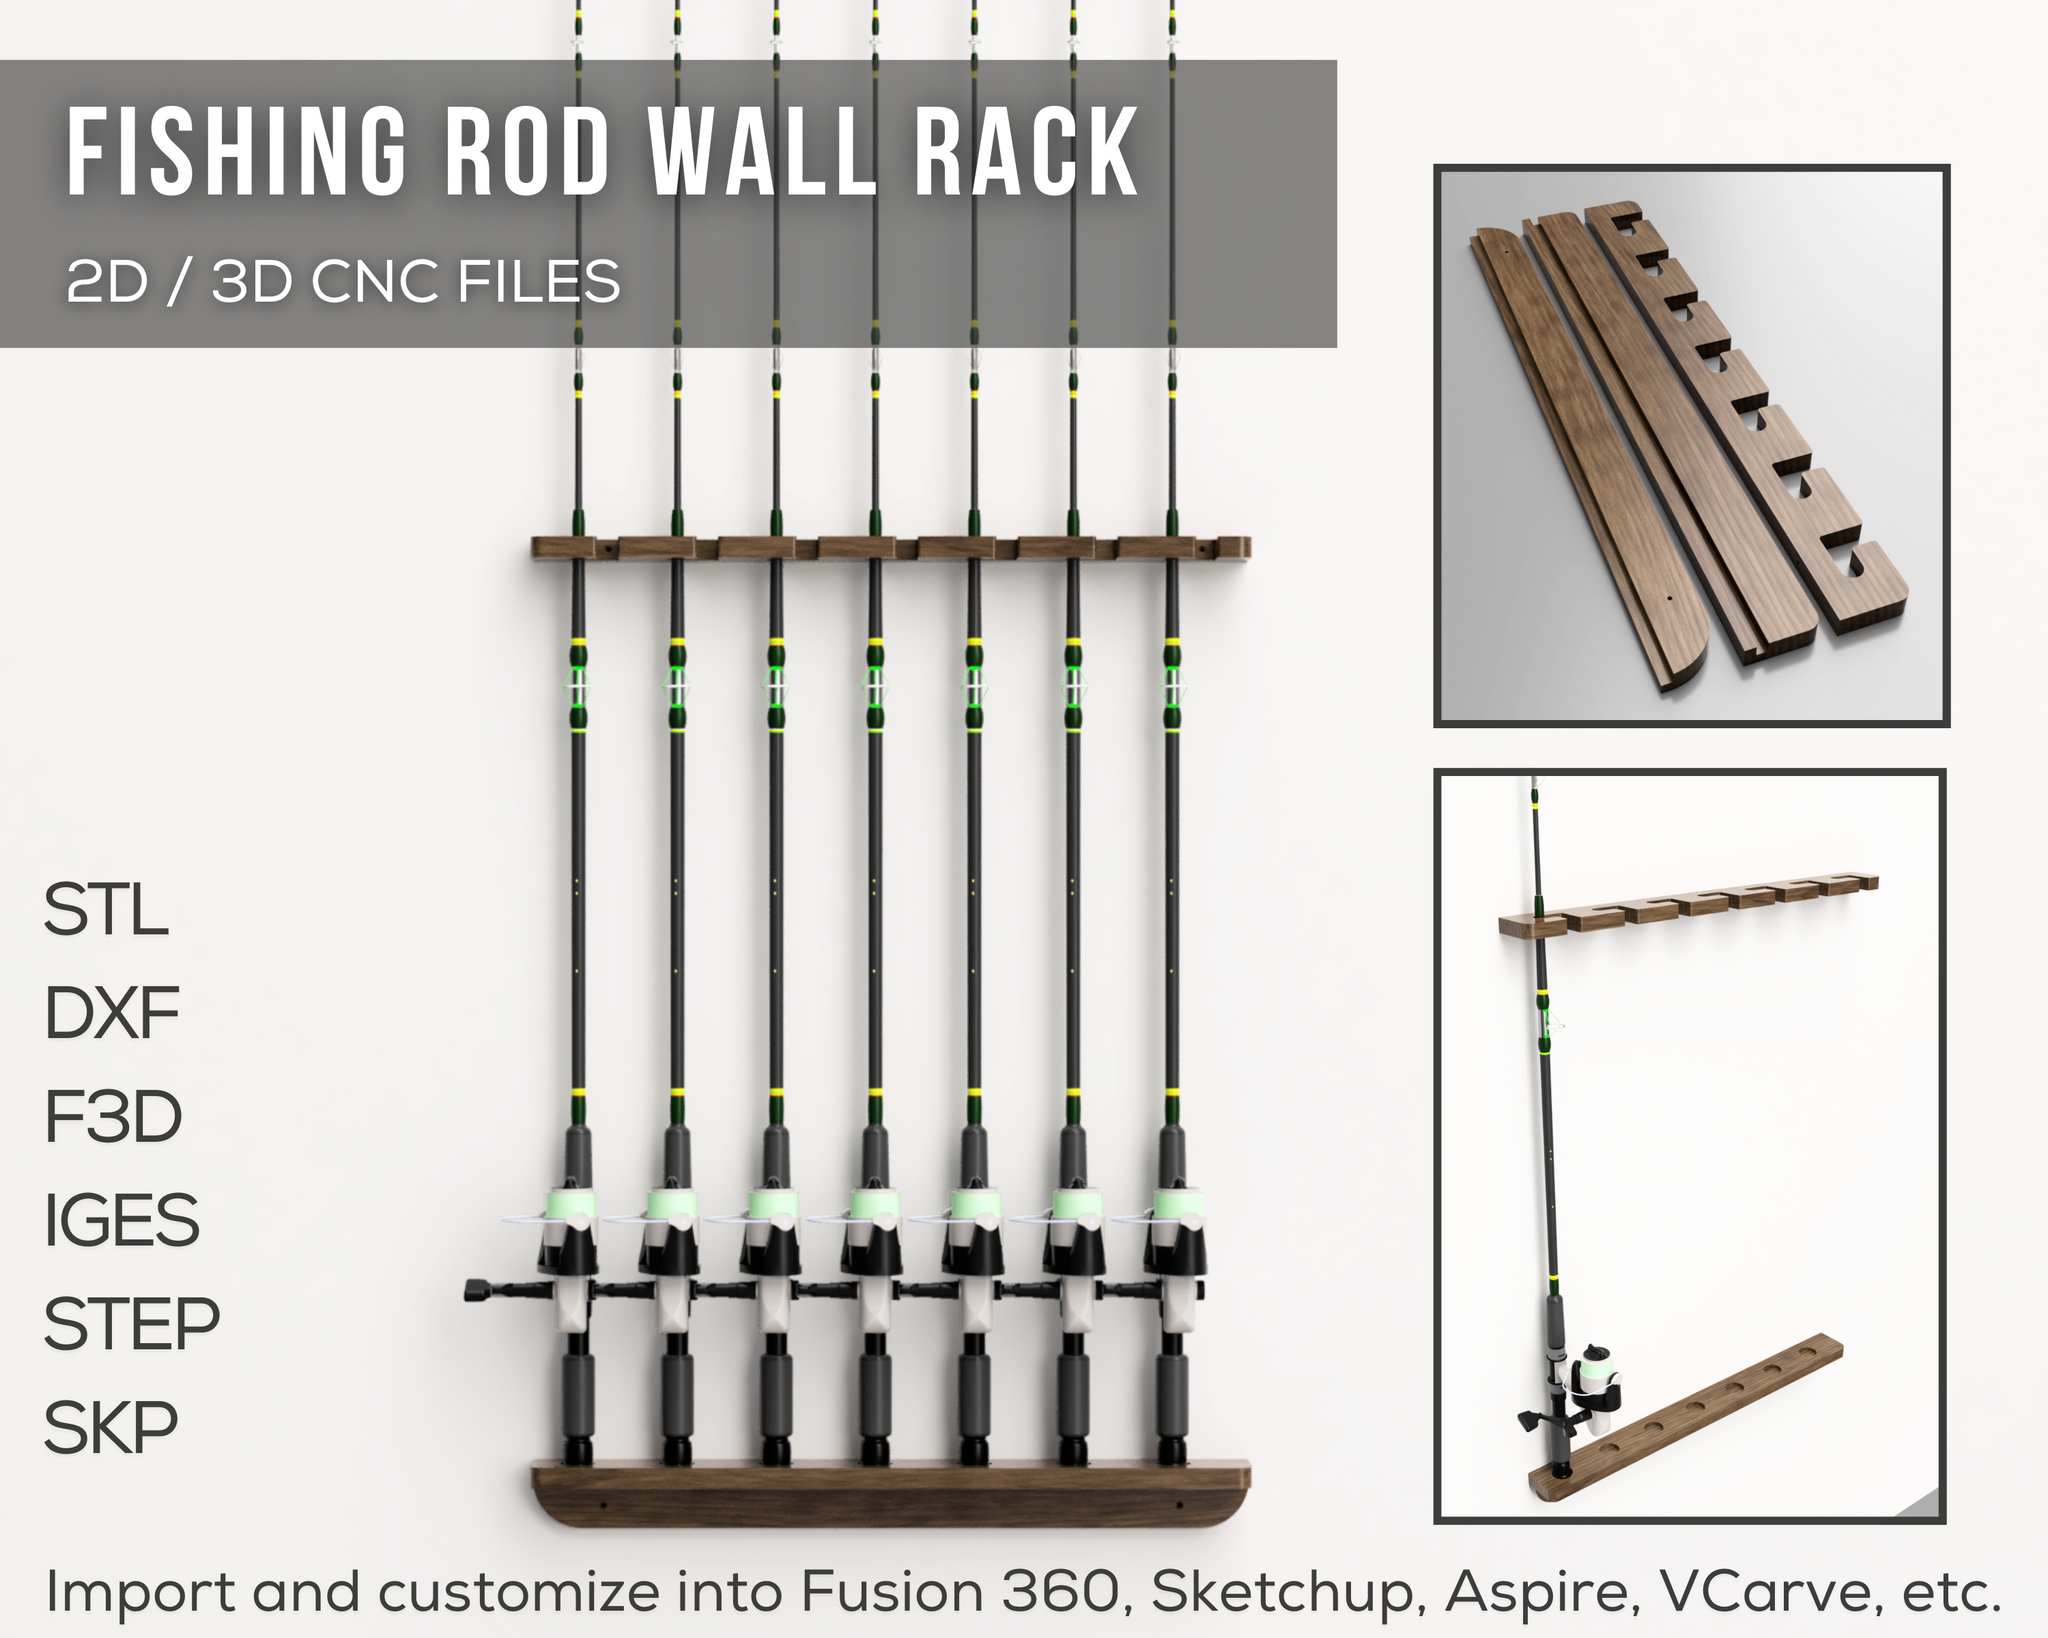 Fishing Rod Wall Rack 2D / 3D CNC Files | STL STEP F3D SKP IGES DXF |  Instant Download | Fishing Accessories | CNC Woodworking | 3D Printing